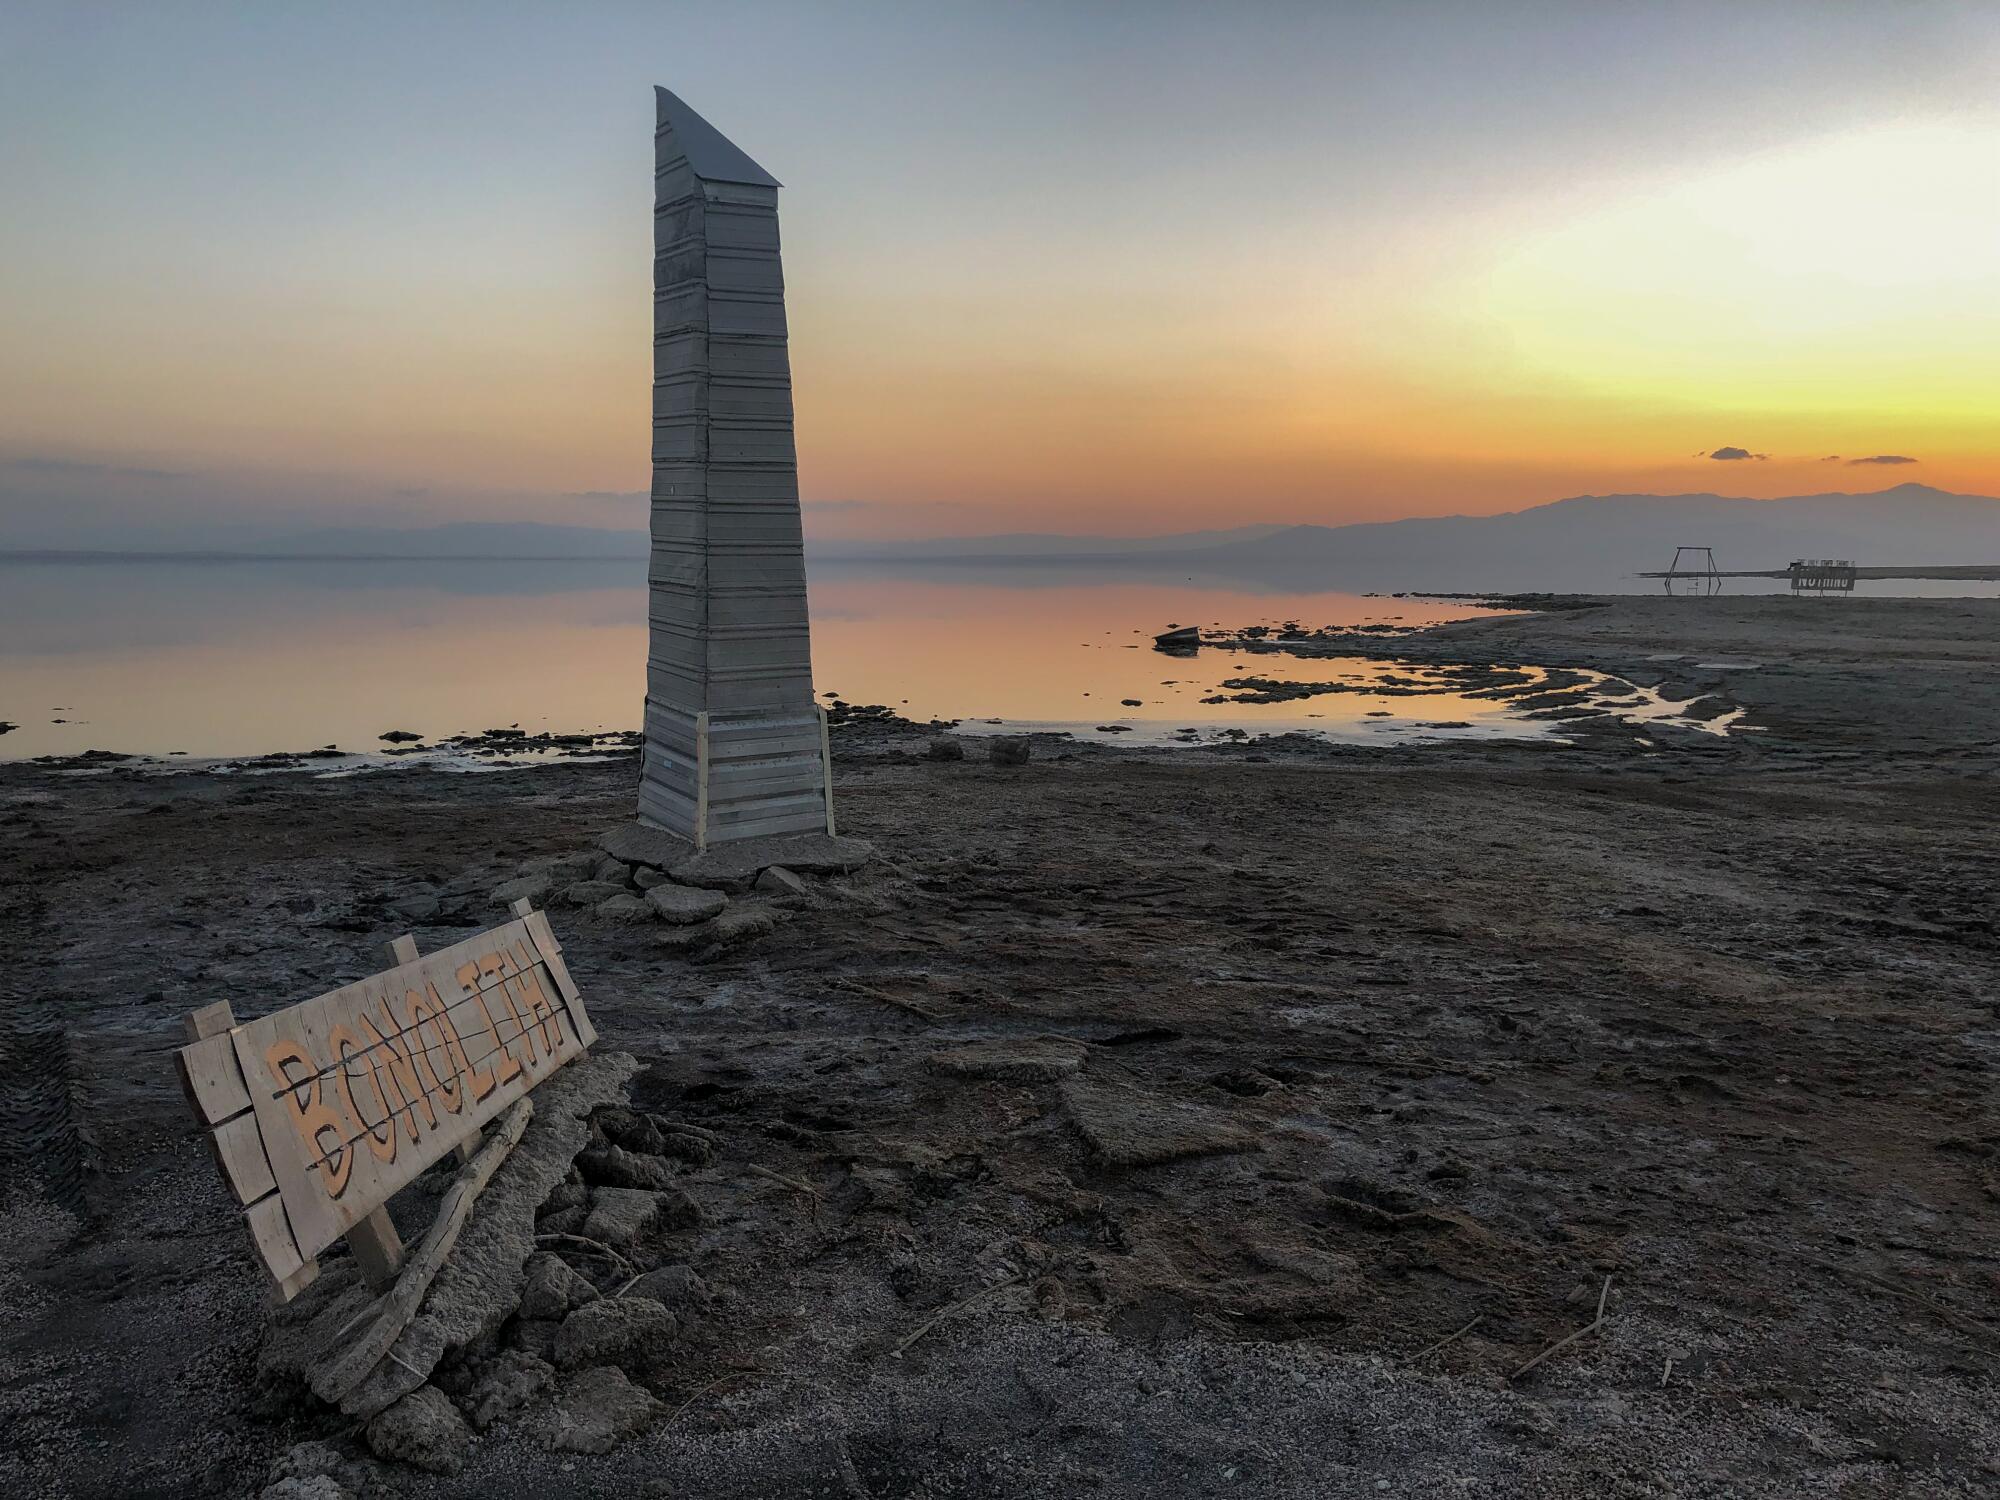 A sunset scene on a beach with a sign reading "Bonolith" and a wooden monolith figure